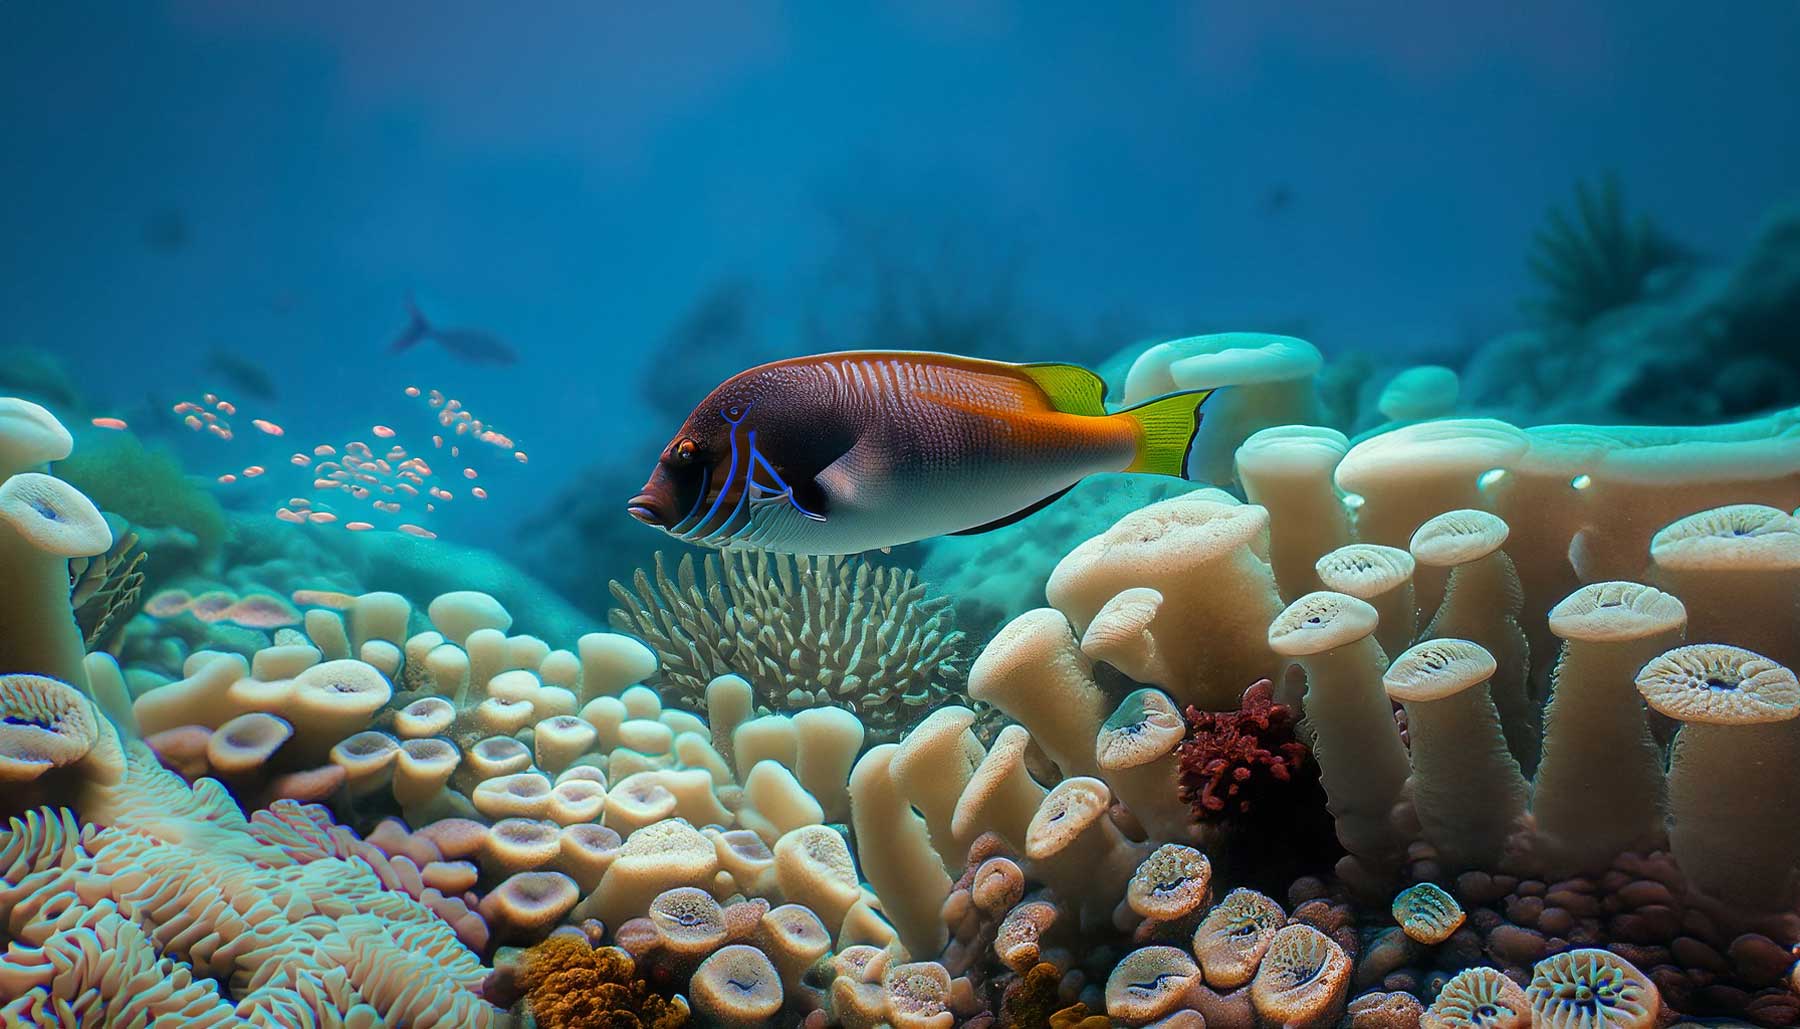 Firefly fish swimming in a coral reef